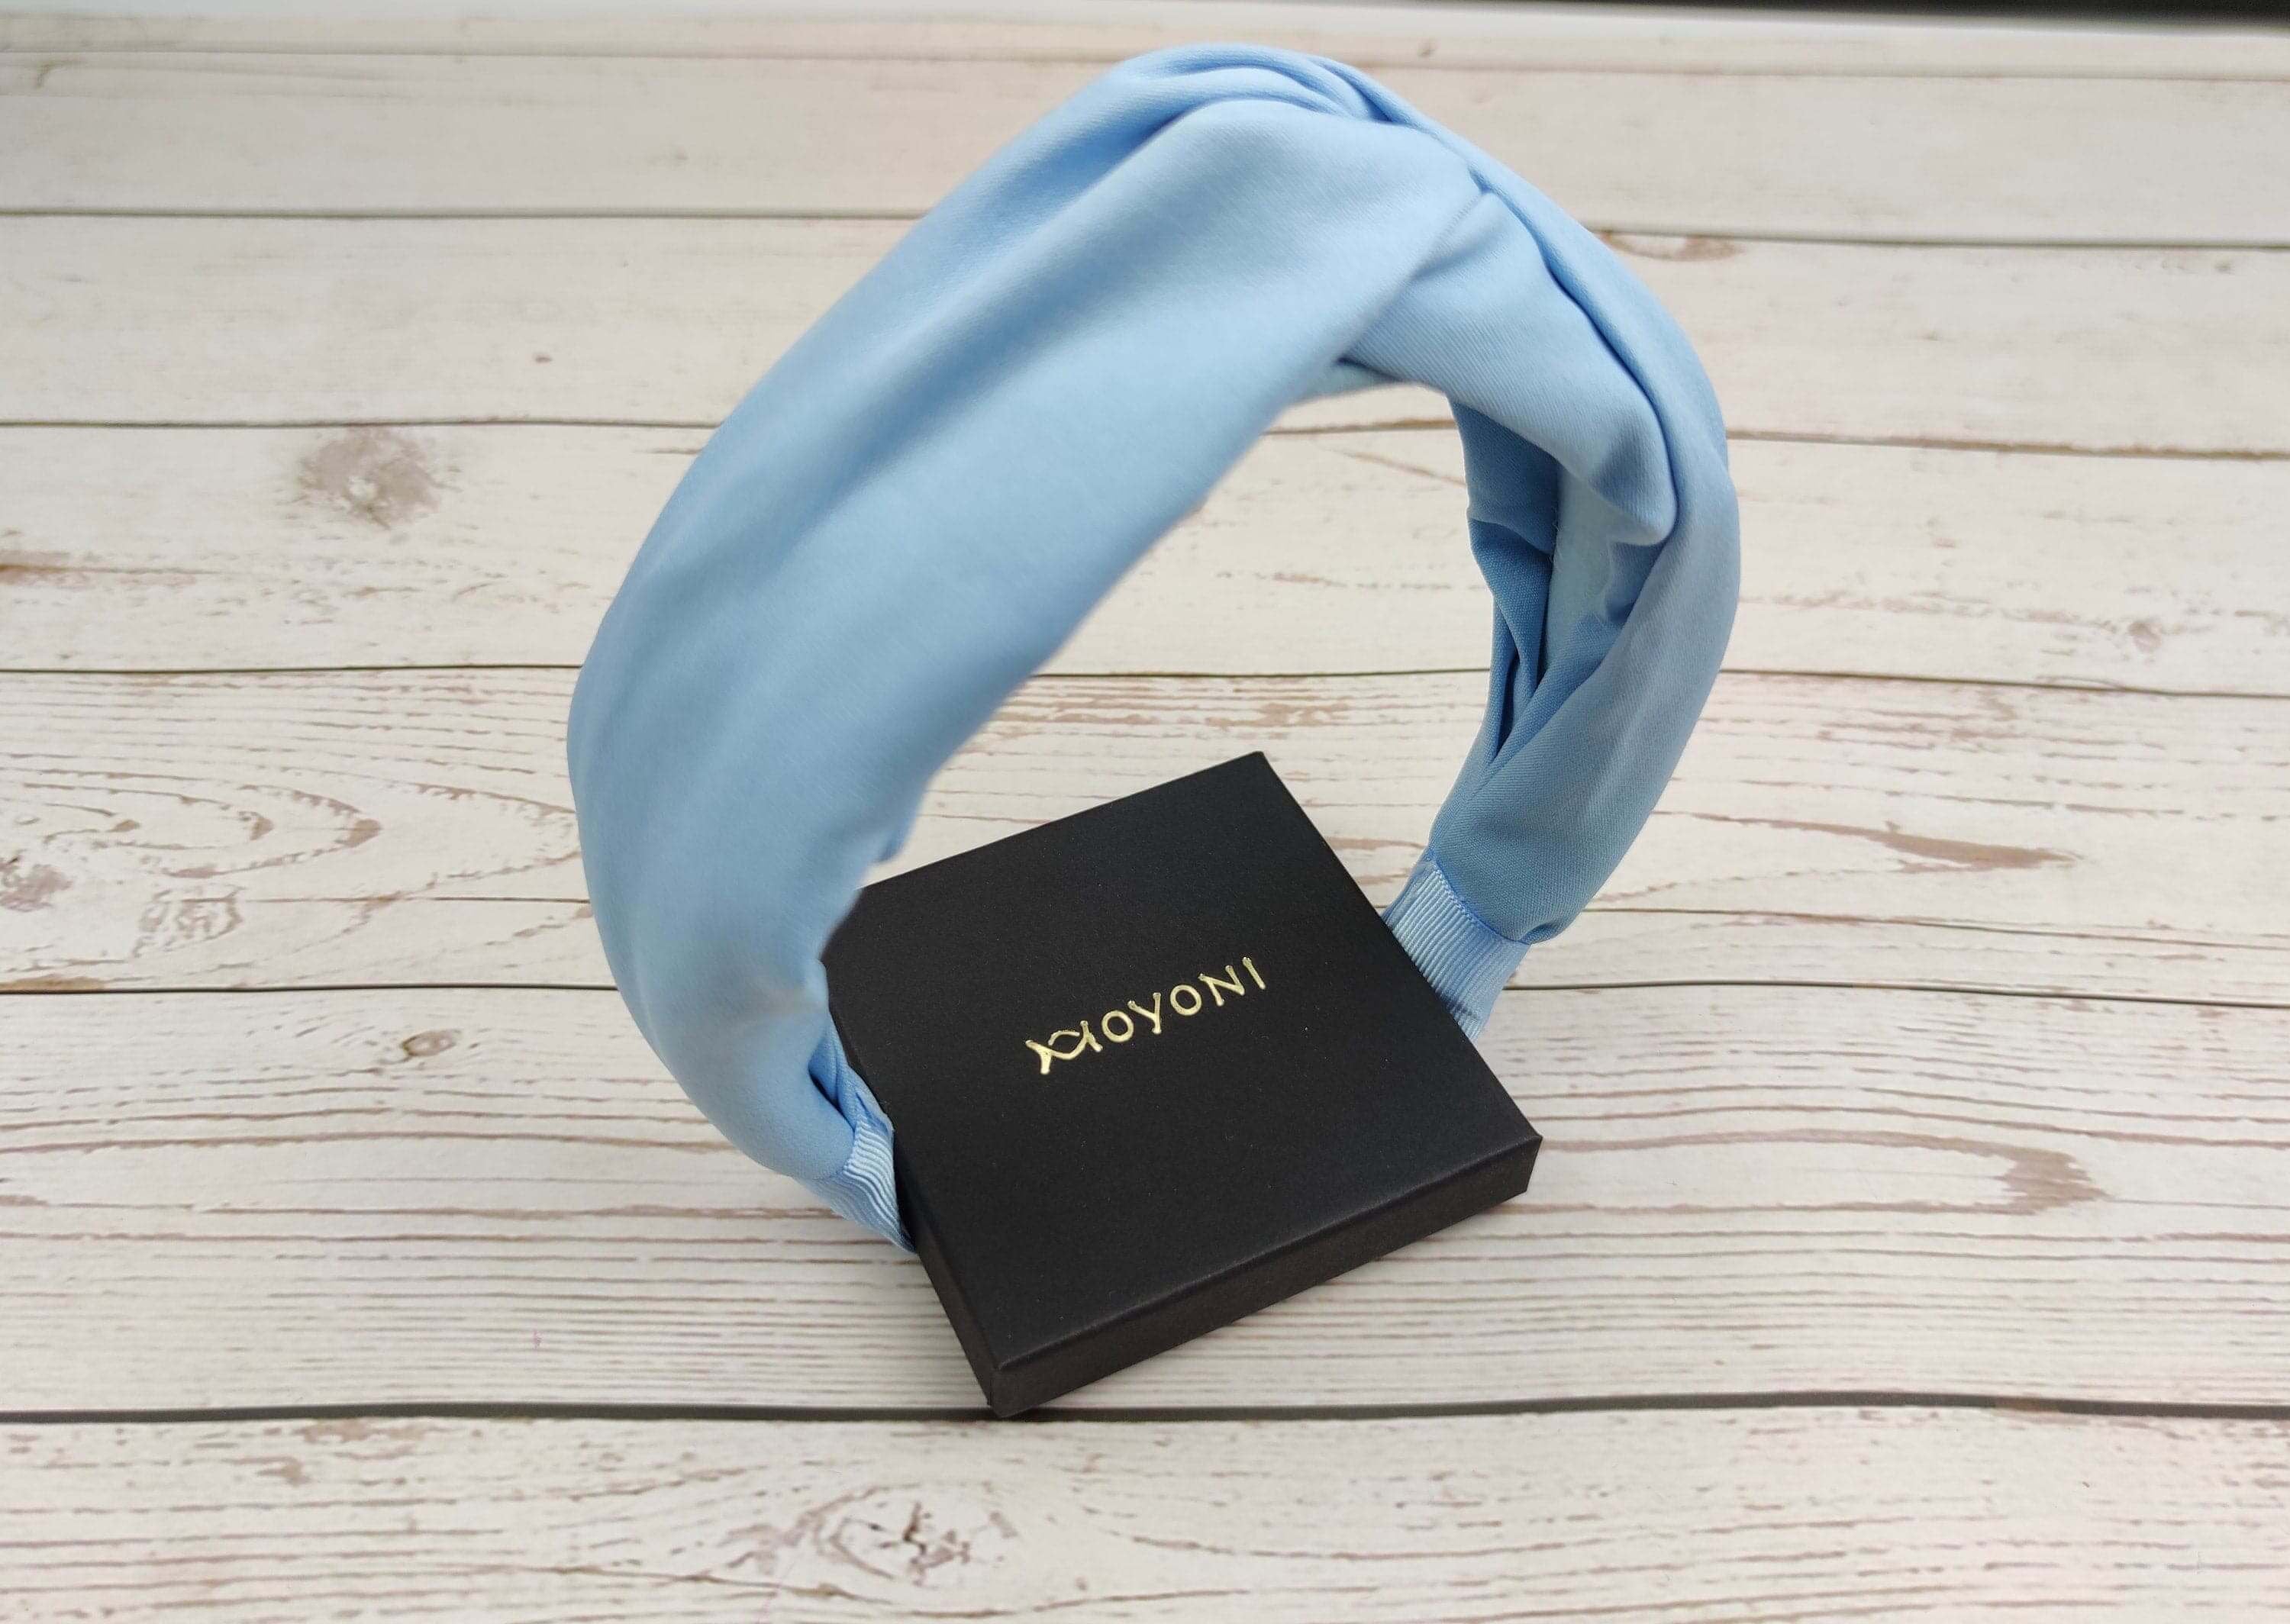 An image of a wearing a light blue headband. The soft and stretchy material makes it comfortable for little ones to wear while adding a cute accessory to their outfit.